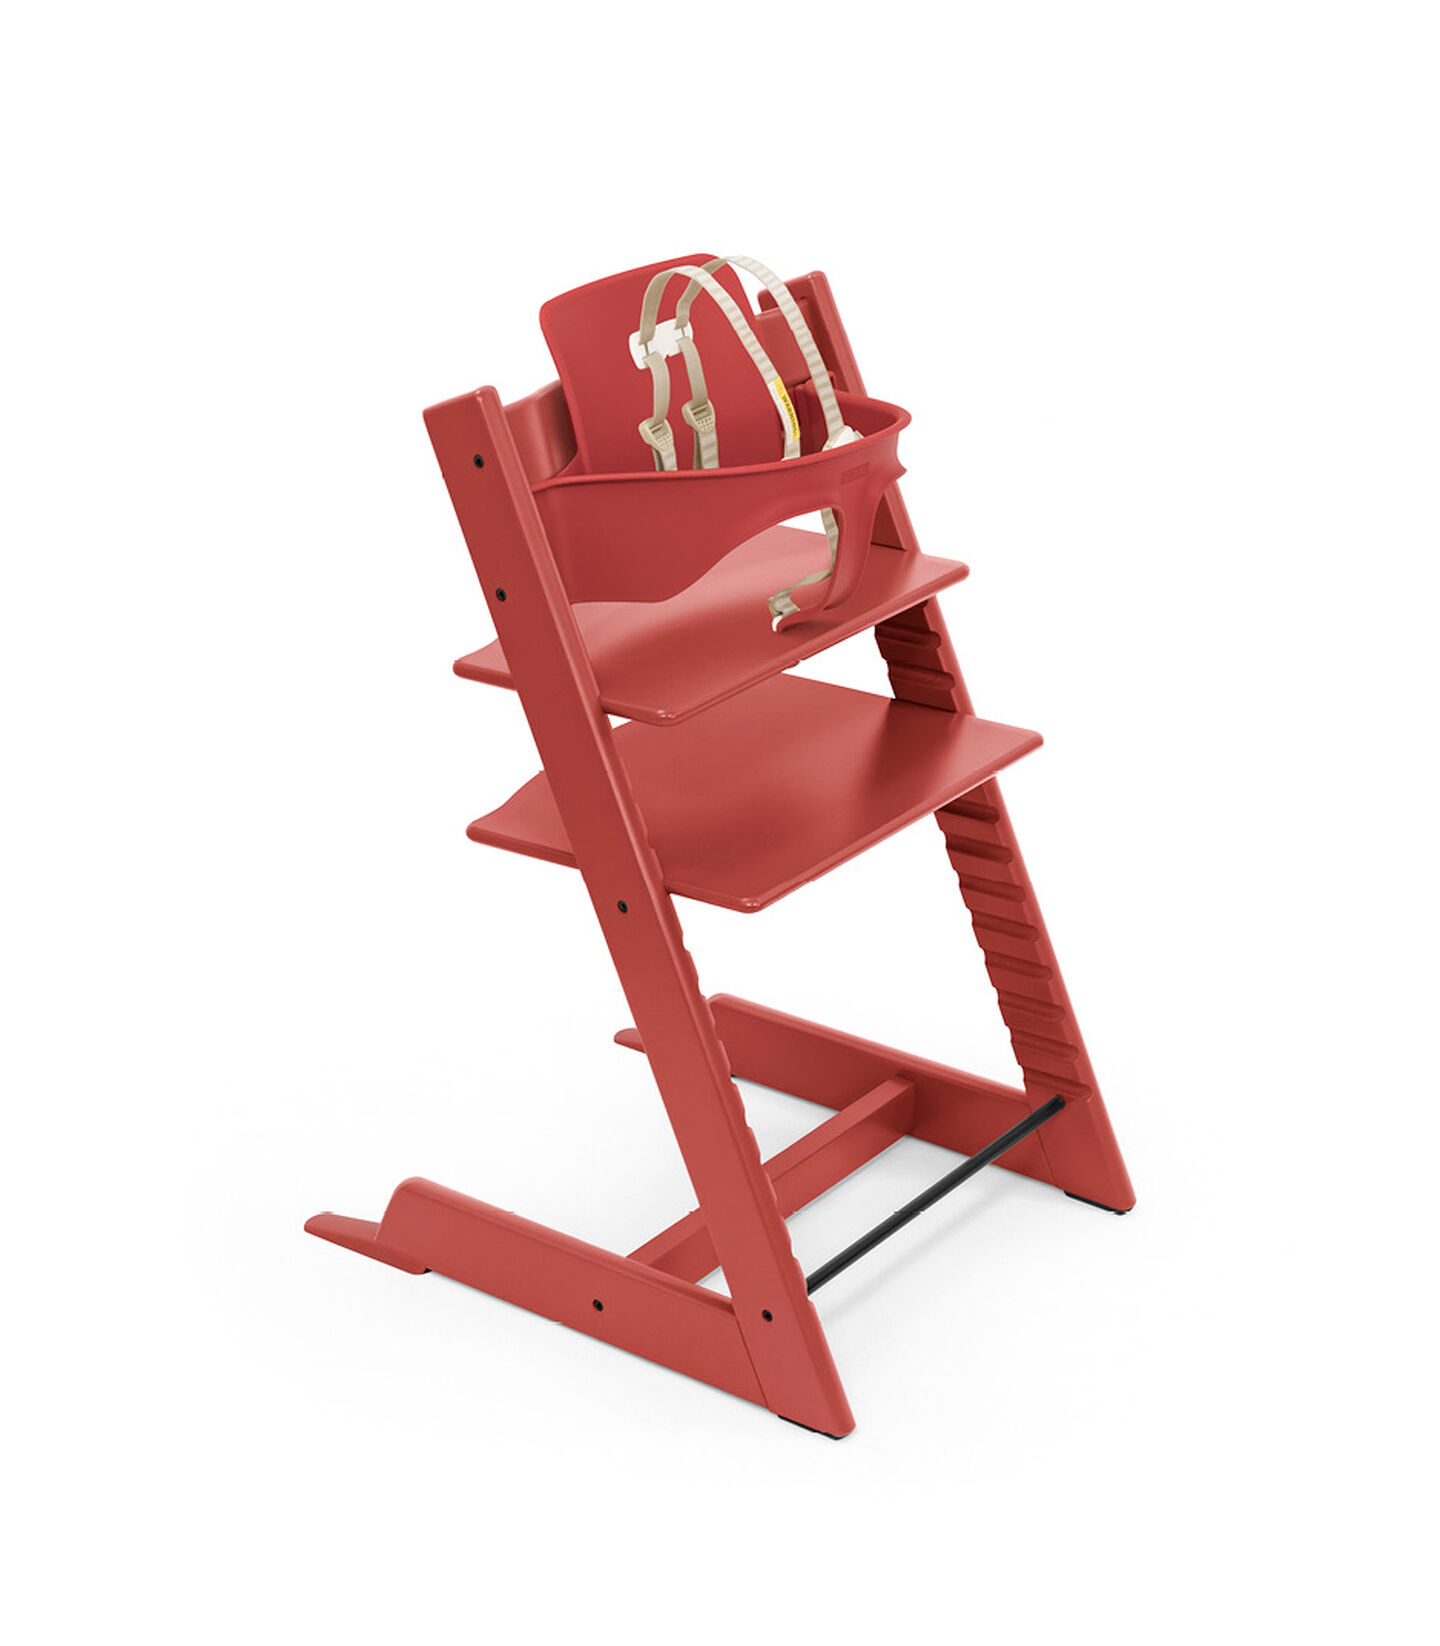 Tripp Trapp® chair Warm Red, Beech Wood, with Baby Set and Harness, US. view 1